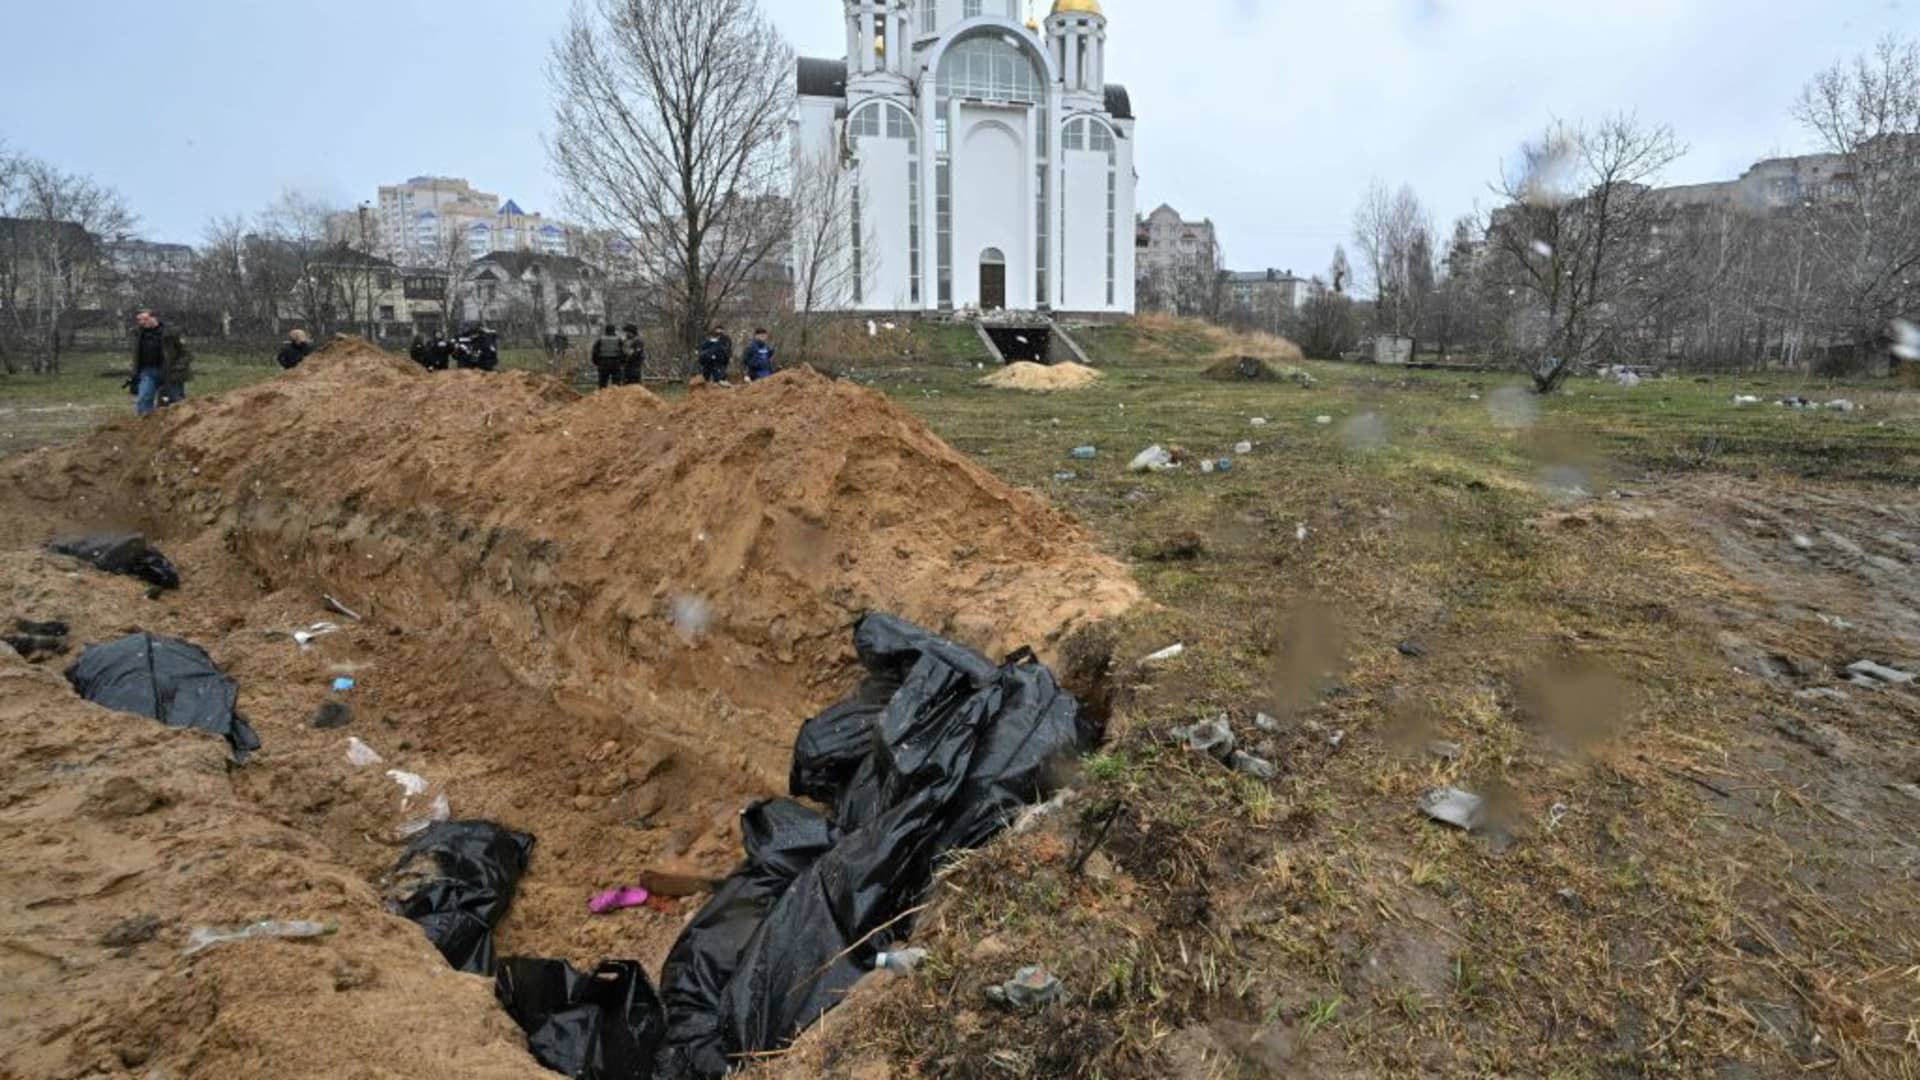 A mass grave is seen behind a church in the town of Bucha, northwest of the Ukrainian capital Kyiv on April 3, 2022.